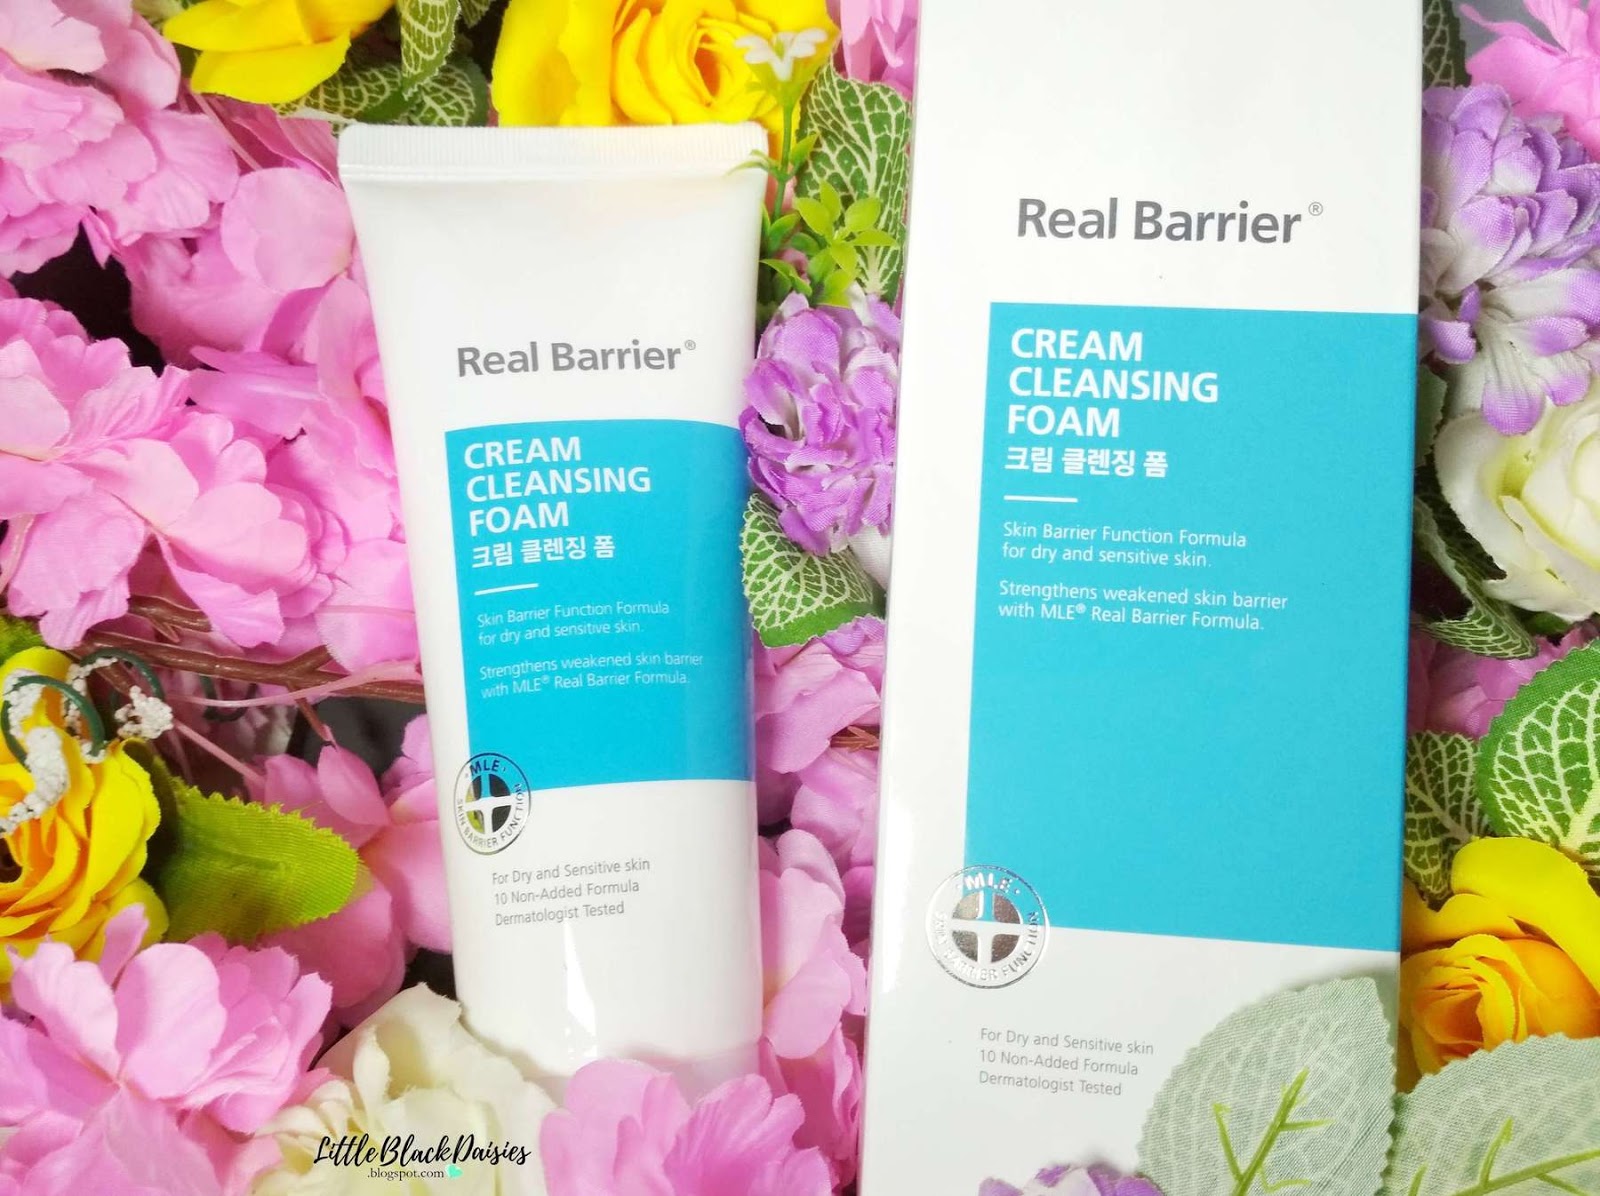 Real Barrier Cream Cleansing Foam. Real Barrier умывалка. Real Barrier Cream Cleansing Foam 120 ml. Real Barrier к PH Cream Cleansing Foam 30 мл.